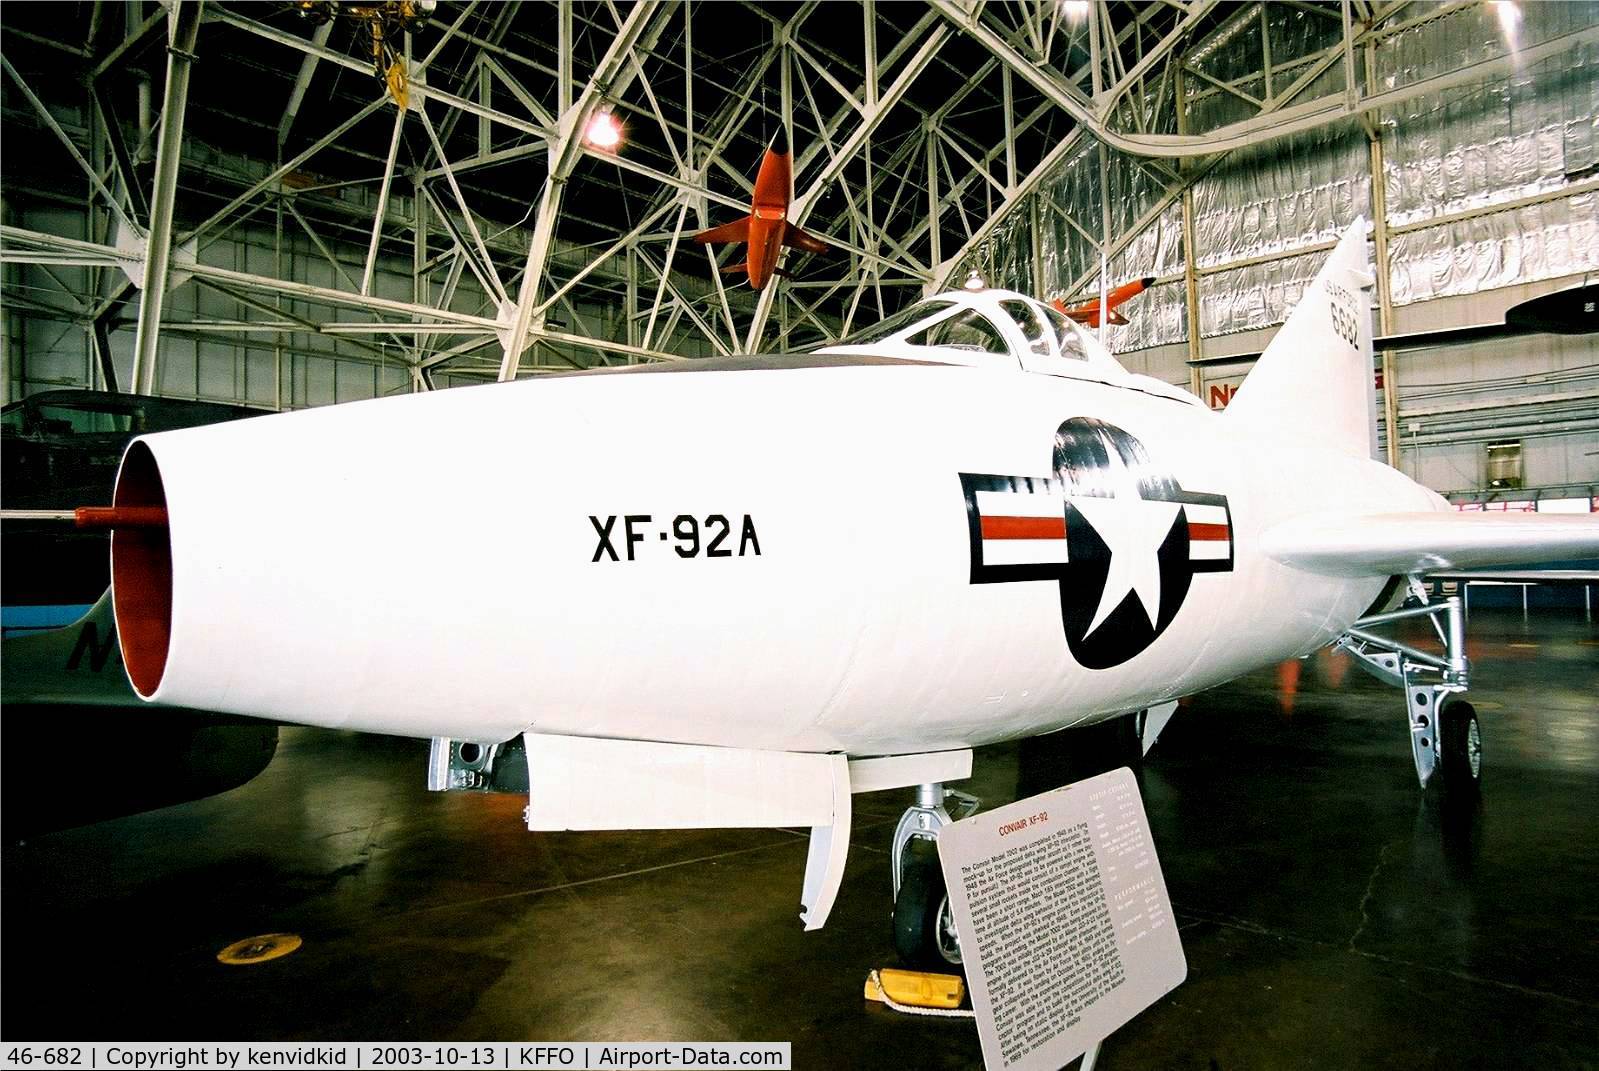 46-682, 1948 Convair XF-92A C/N 7-002, At the Museum of the United States Air Force Dayton Ohio.